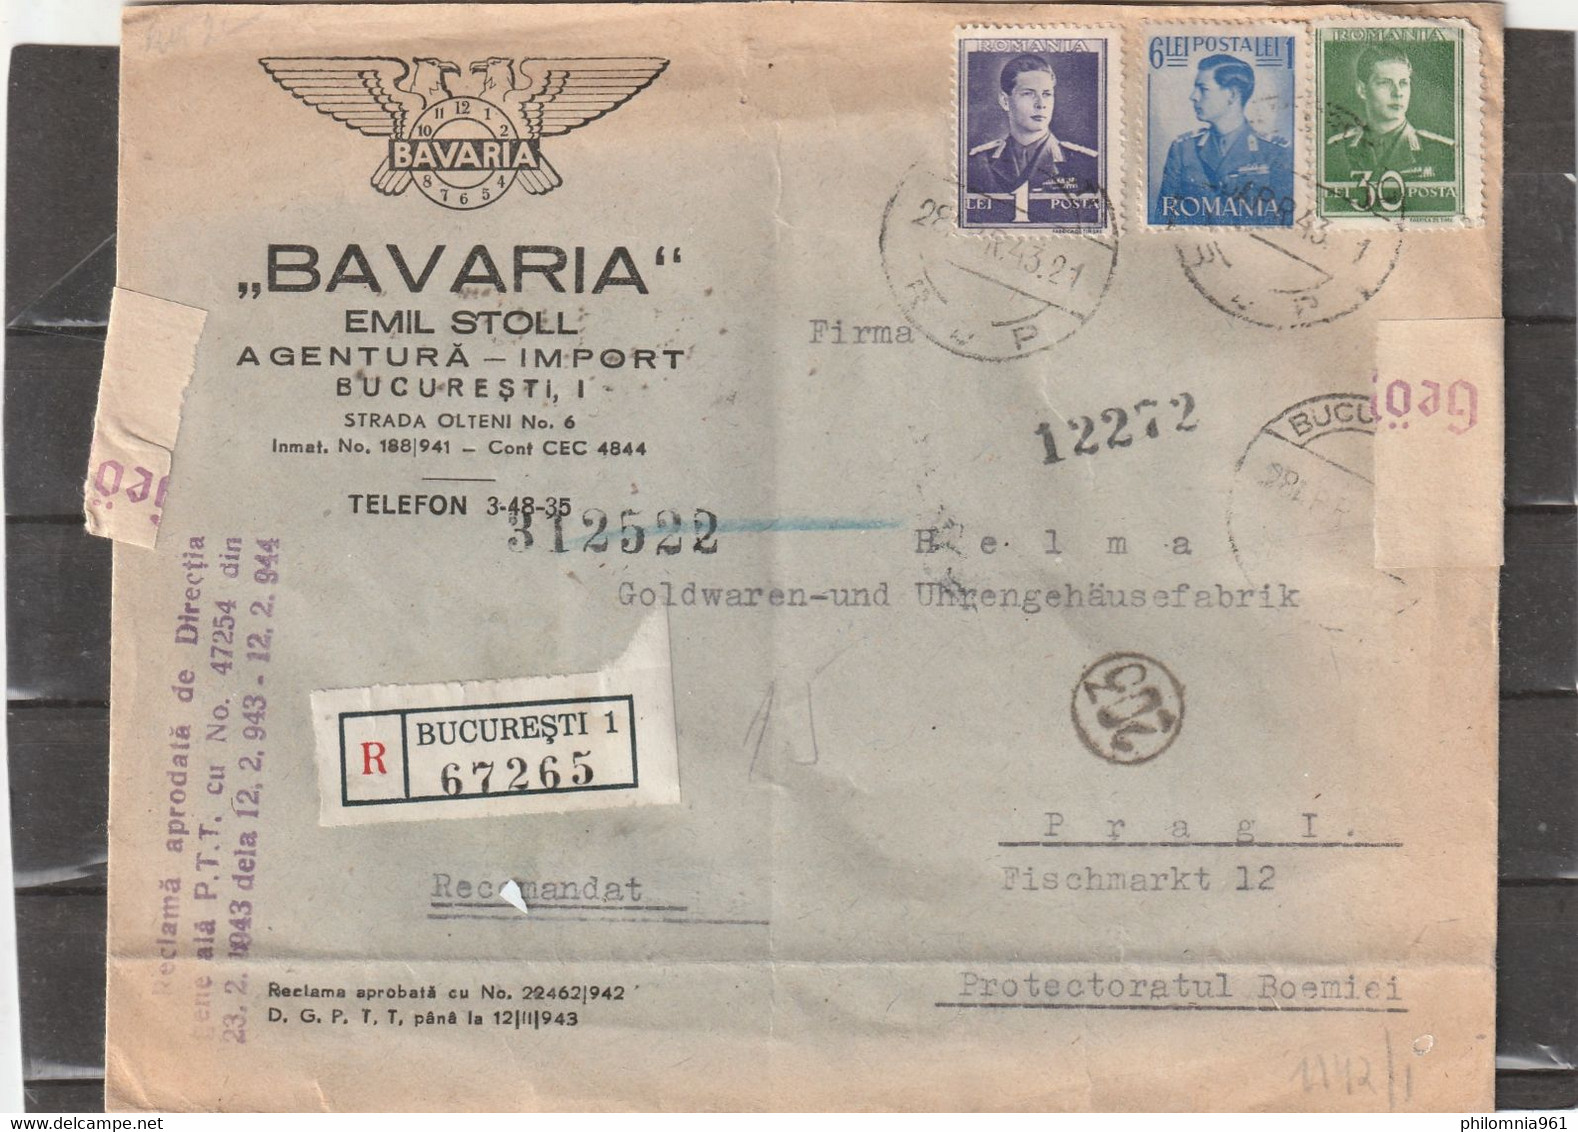 Romania WWII REGISTERED ADVERTISING COVER To Czechoslovakia 1943 - 2. Weltkrieg (Briefe)